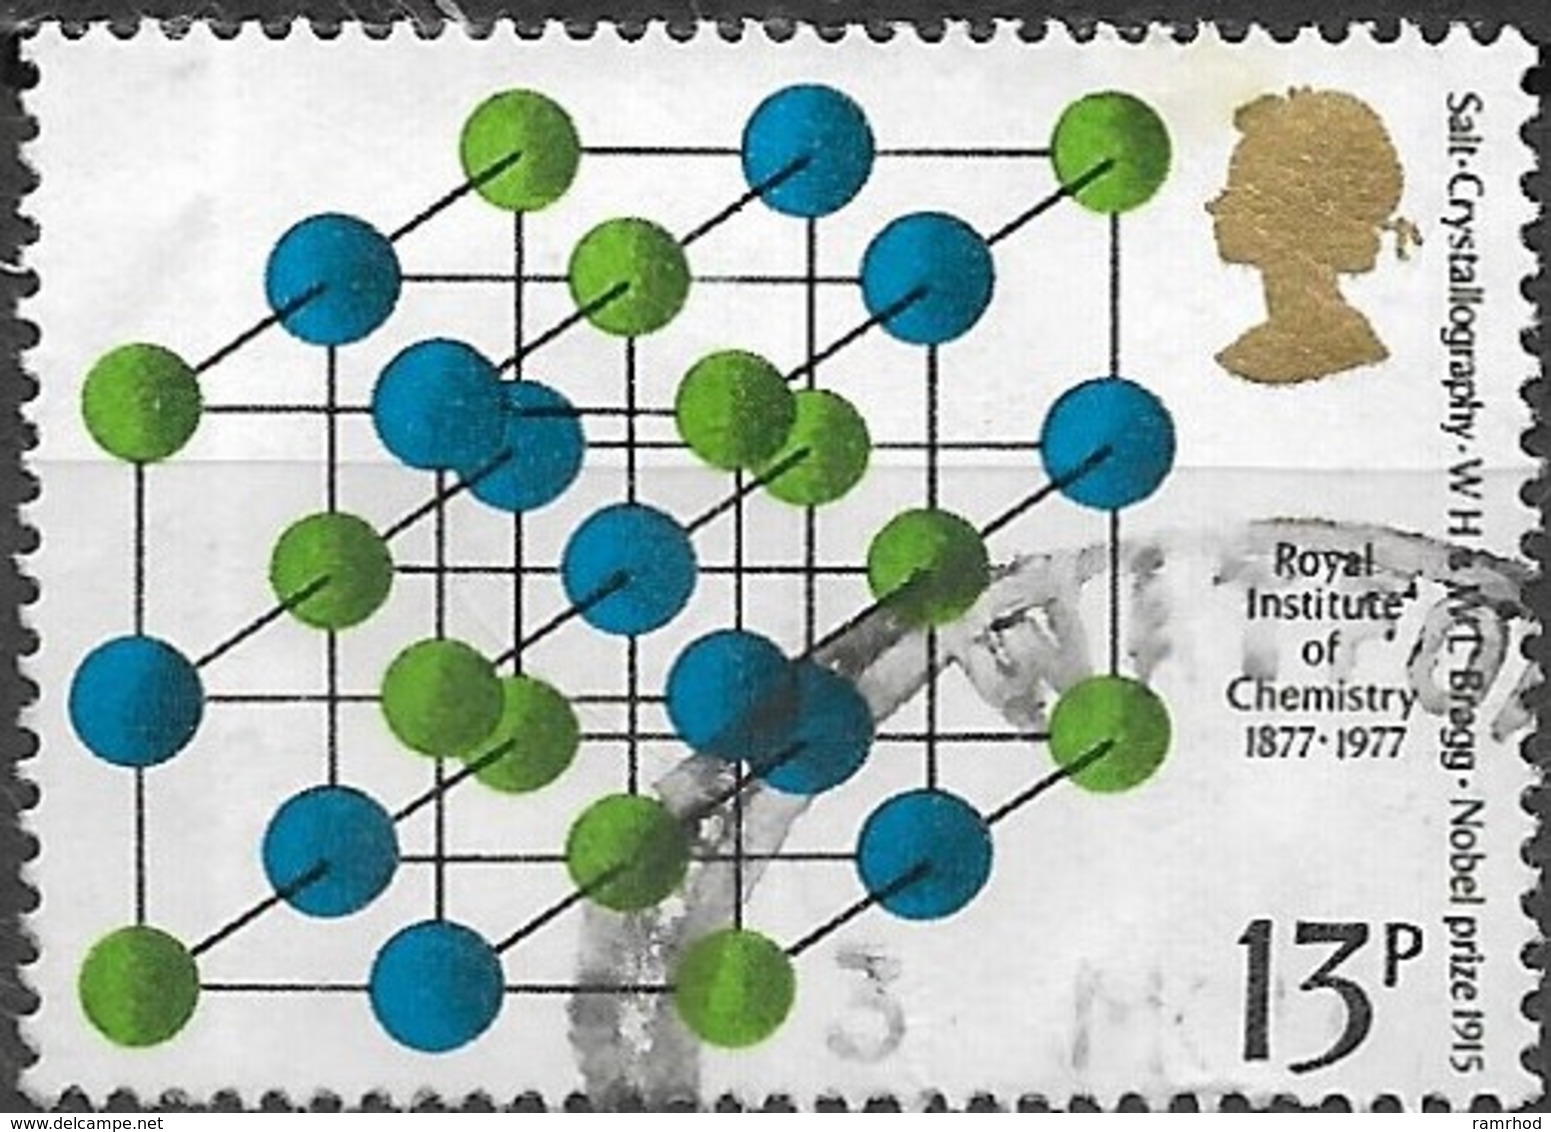 GREAT BRITAIN 1977 Centenary Of Royal Insitute Of Chemistry - 13p - Saltcrystallography FU - Used Stamps